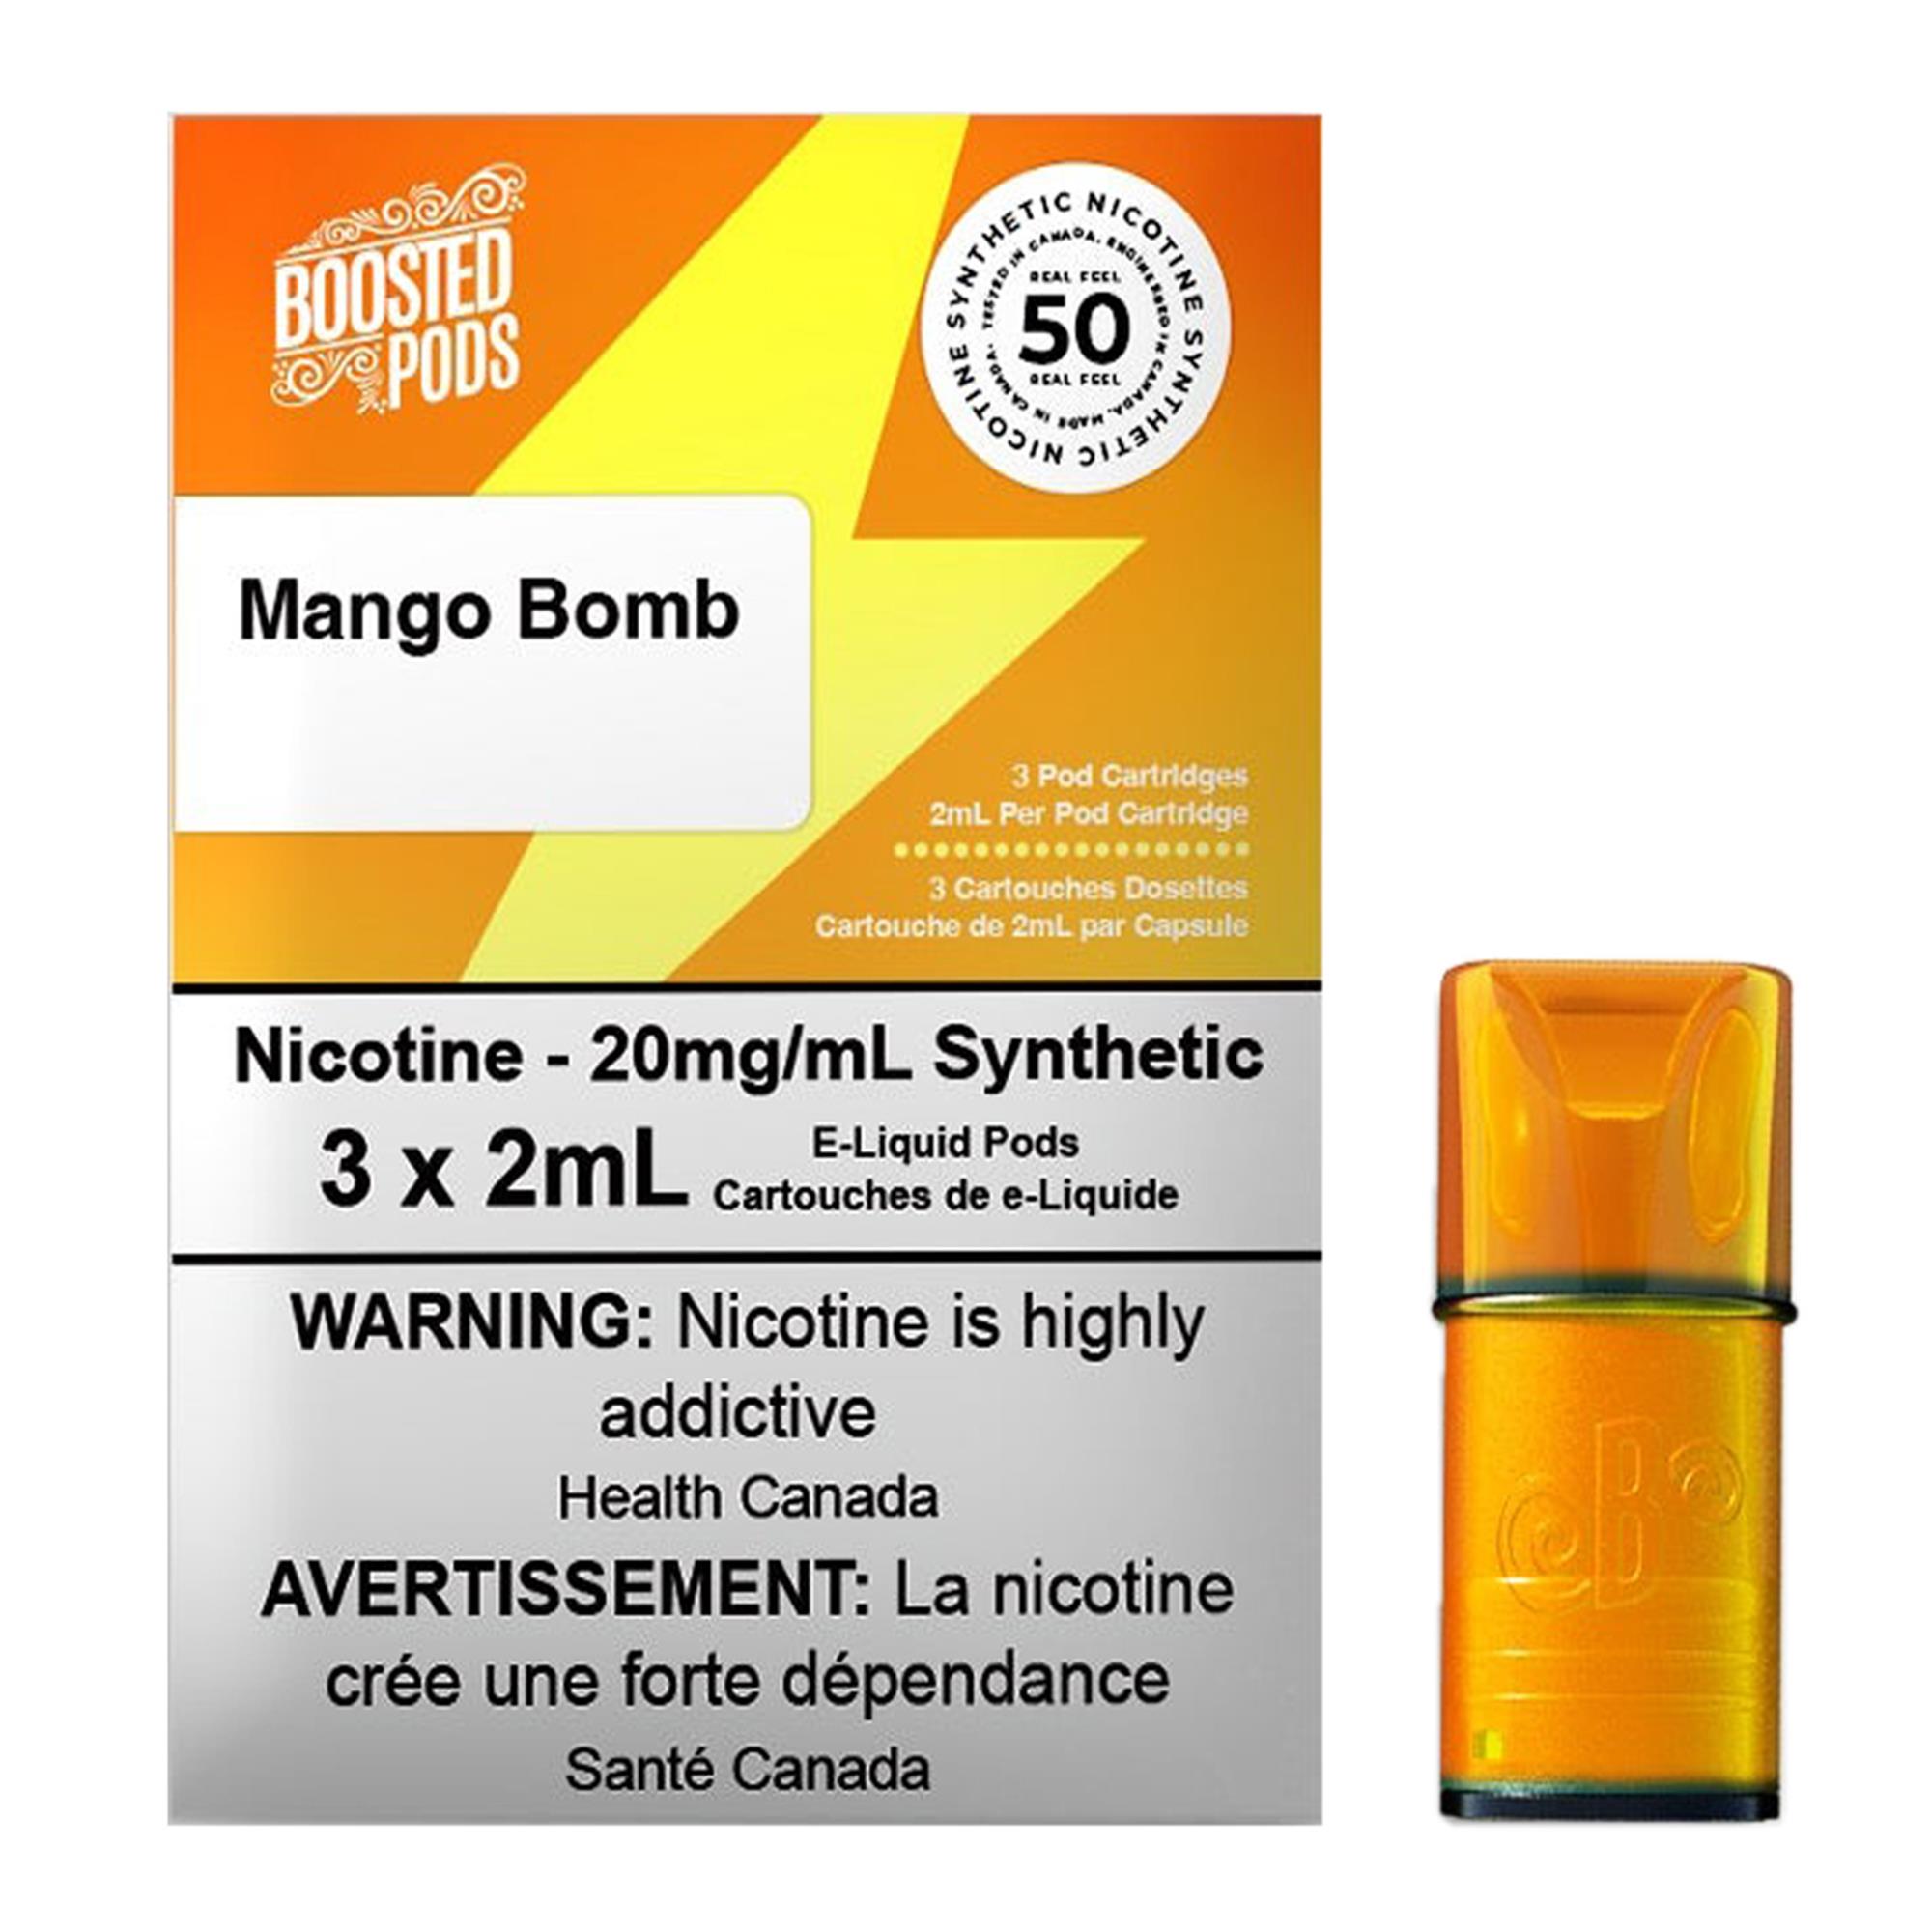 STLTH BOOSTED MANGO BOMB PODS